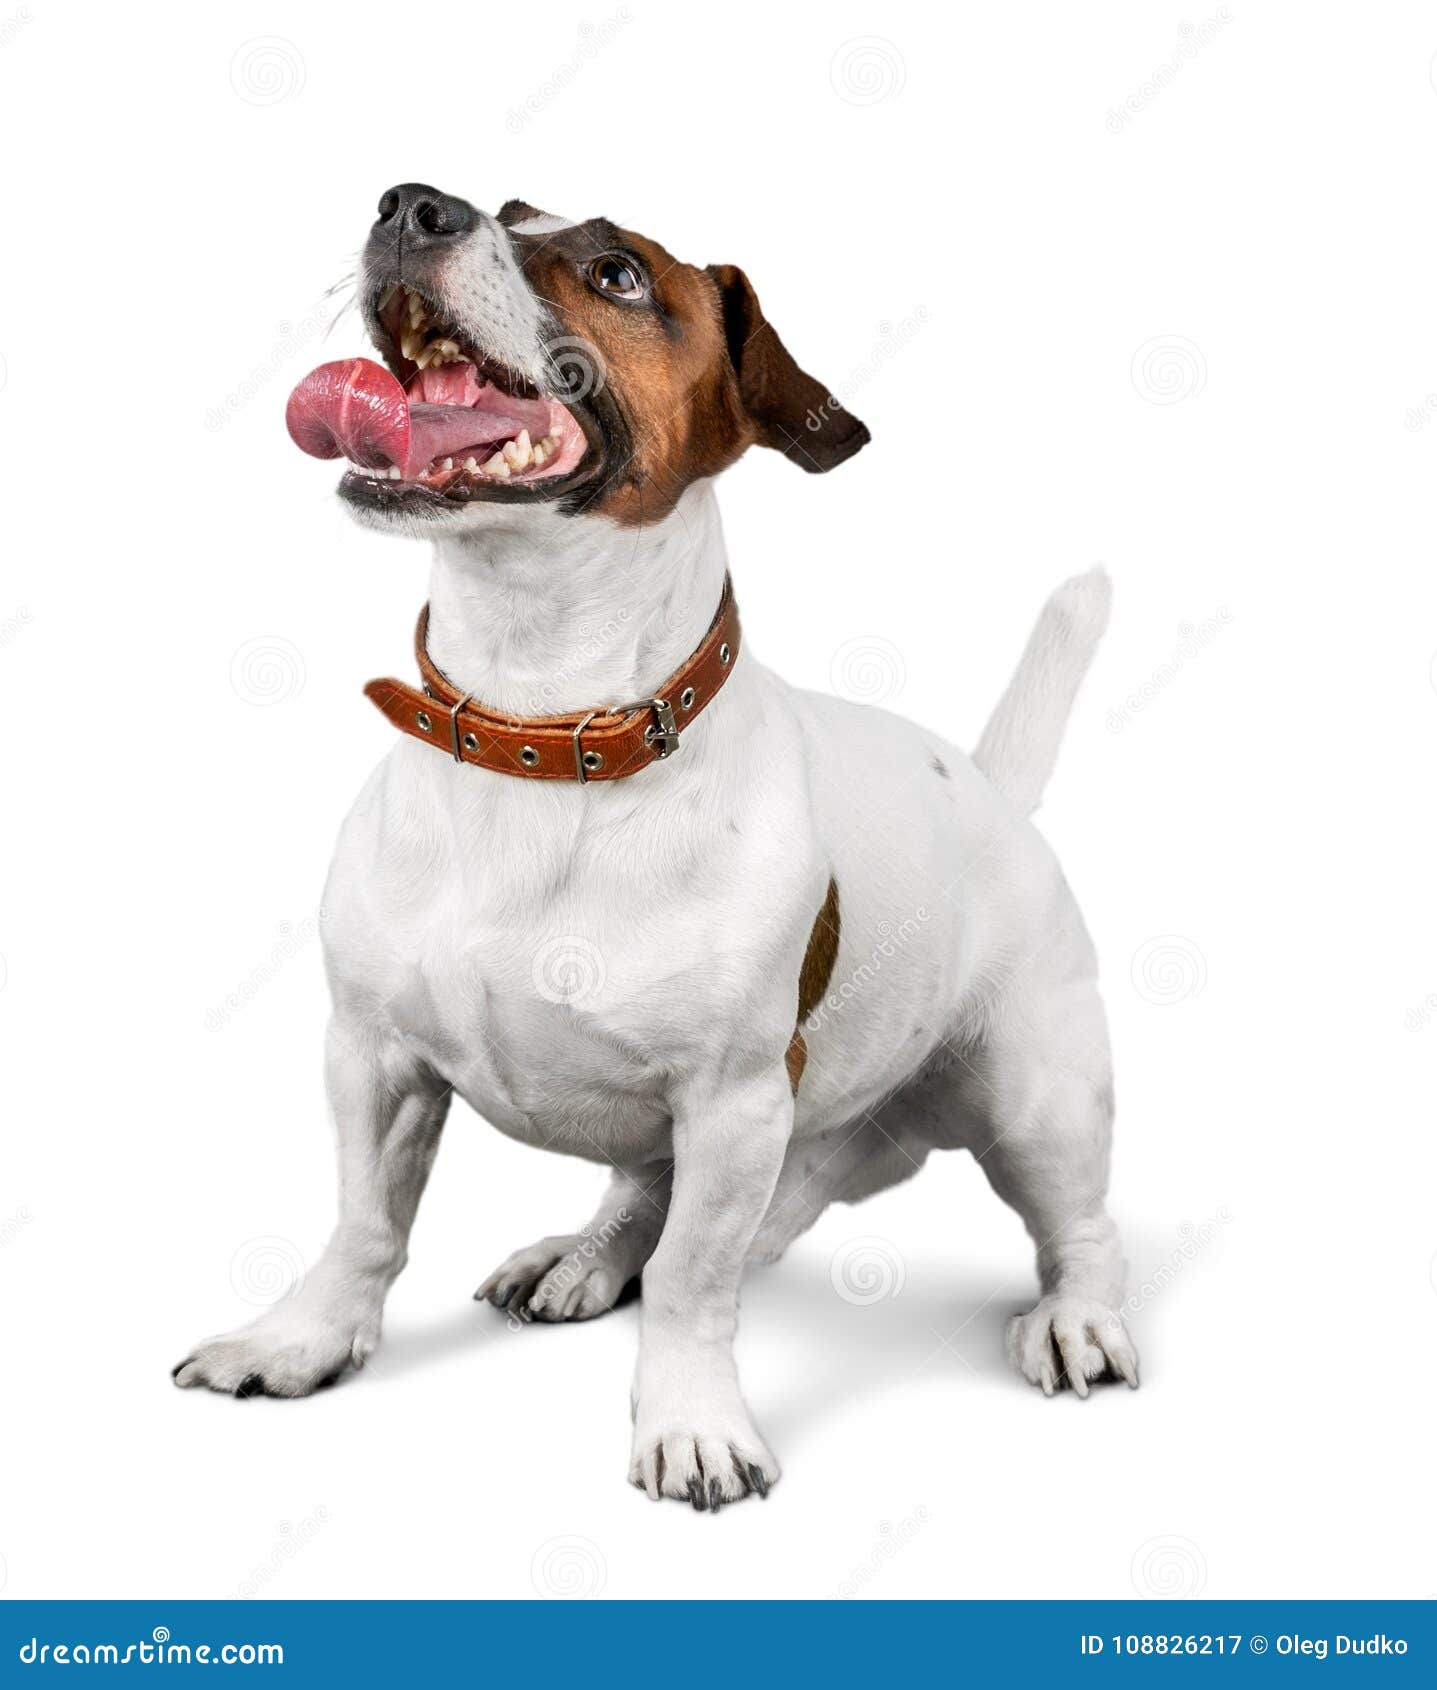 cute small dog jack russell terrier on white